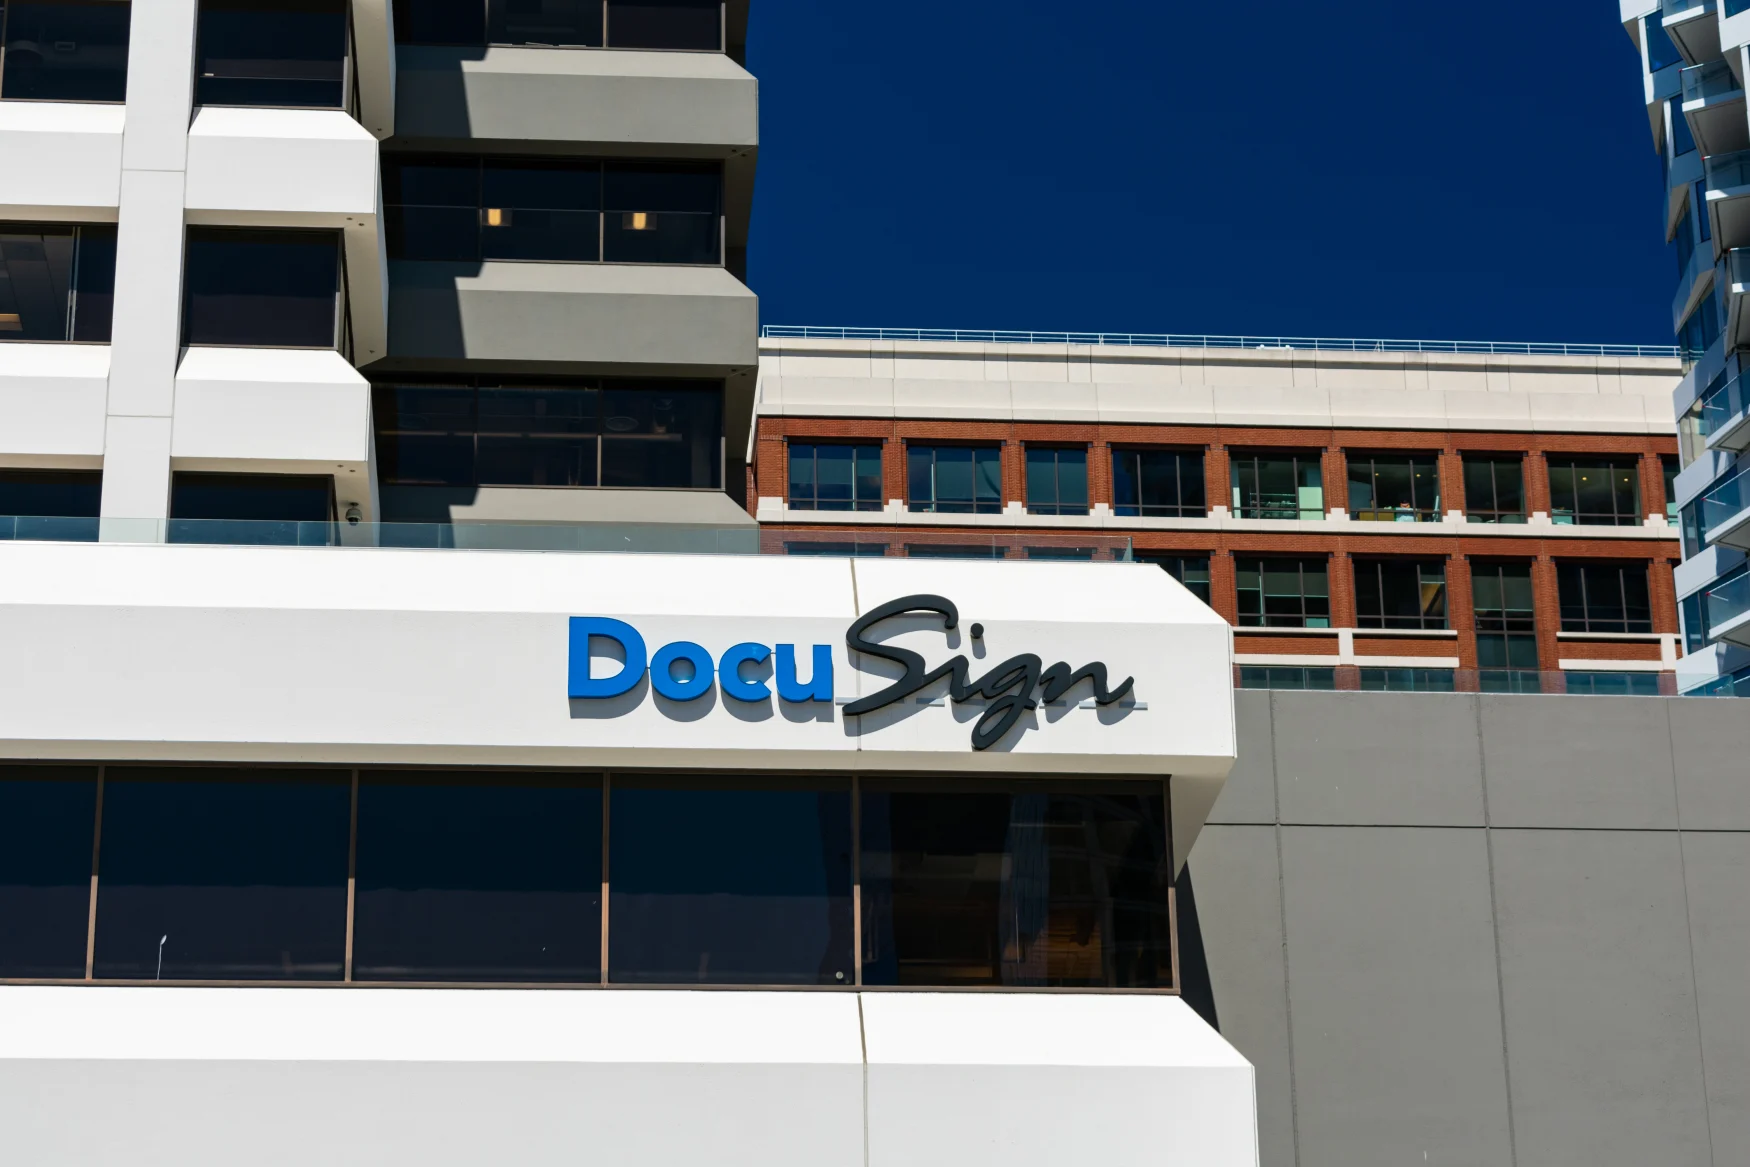 San Francisco, California, USA - July 12, 2019: DocuSign headquarters building. DocuSign is an American company that helps organizations connect and automate how they prepare, sign, act on, and manage agreements.